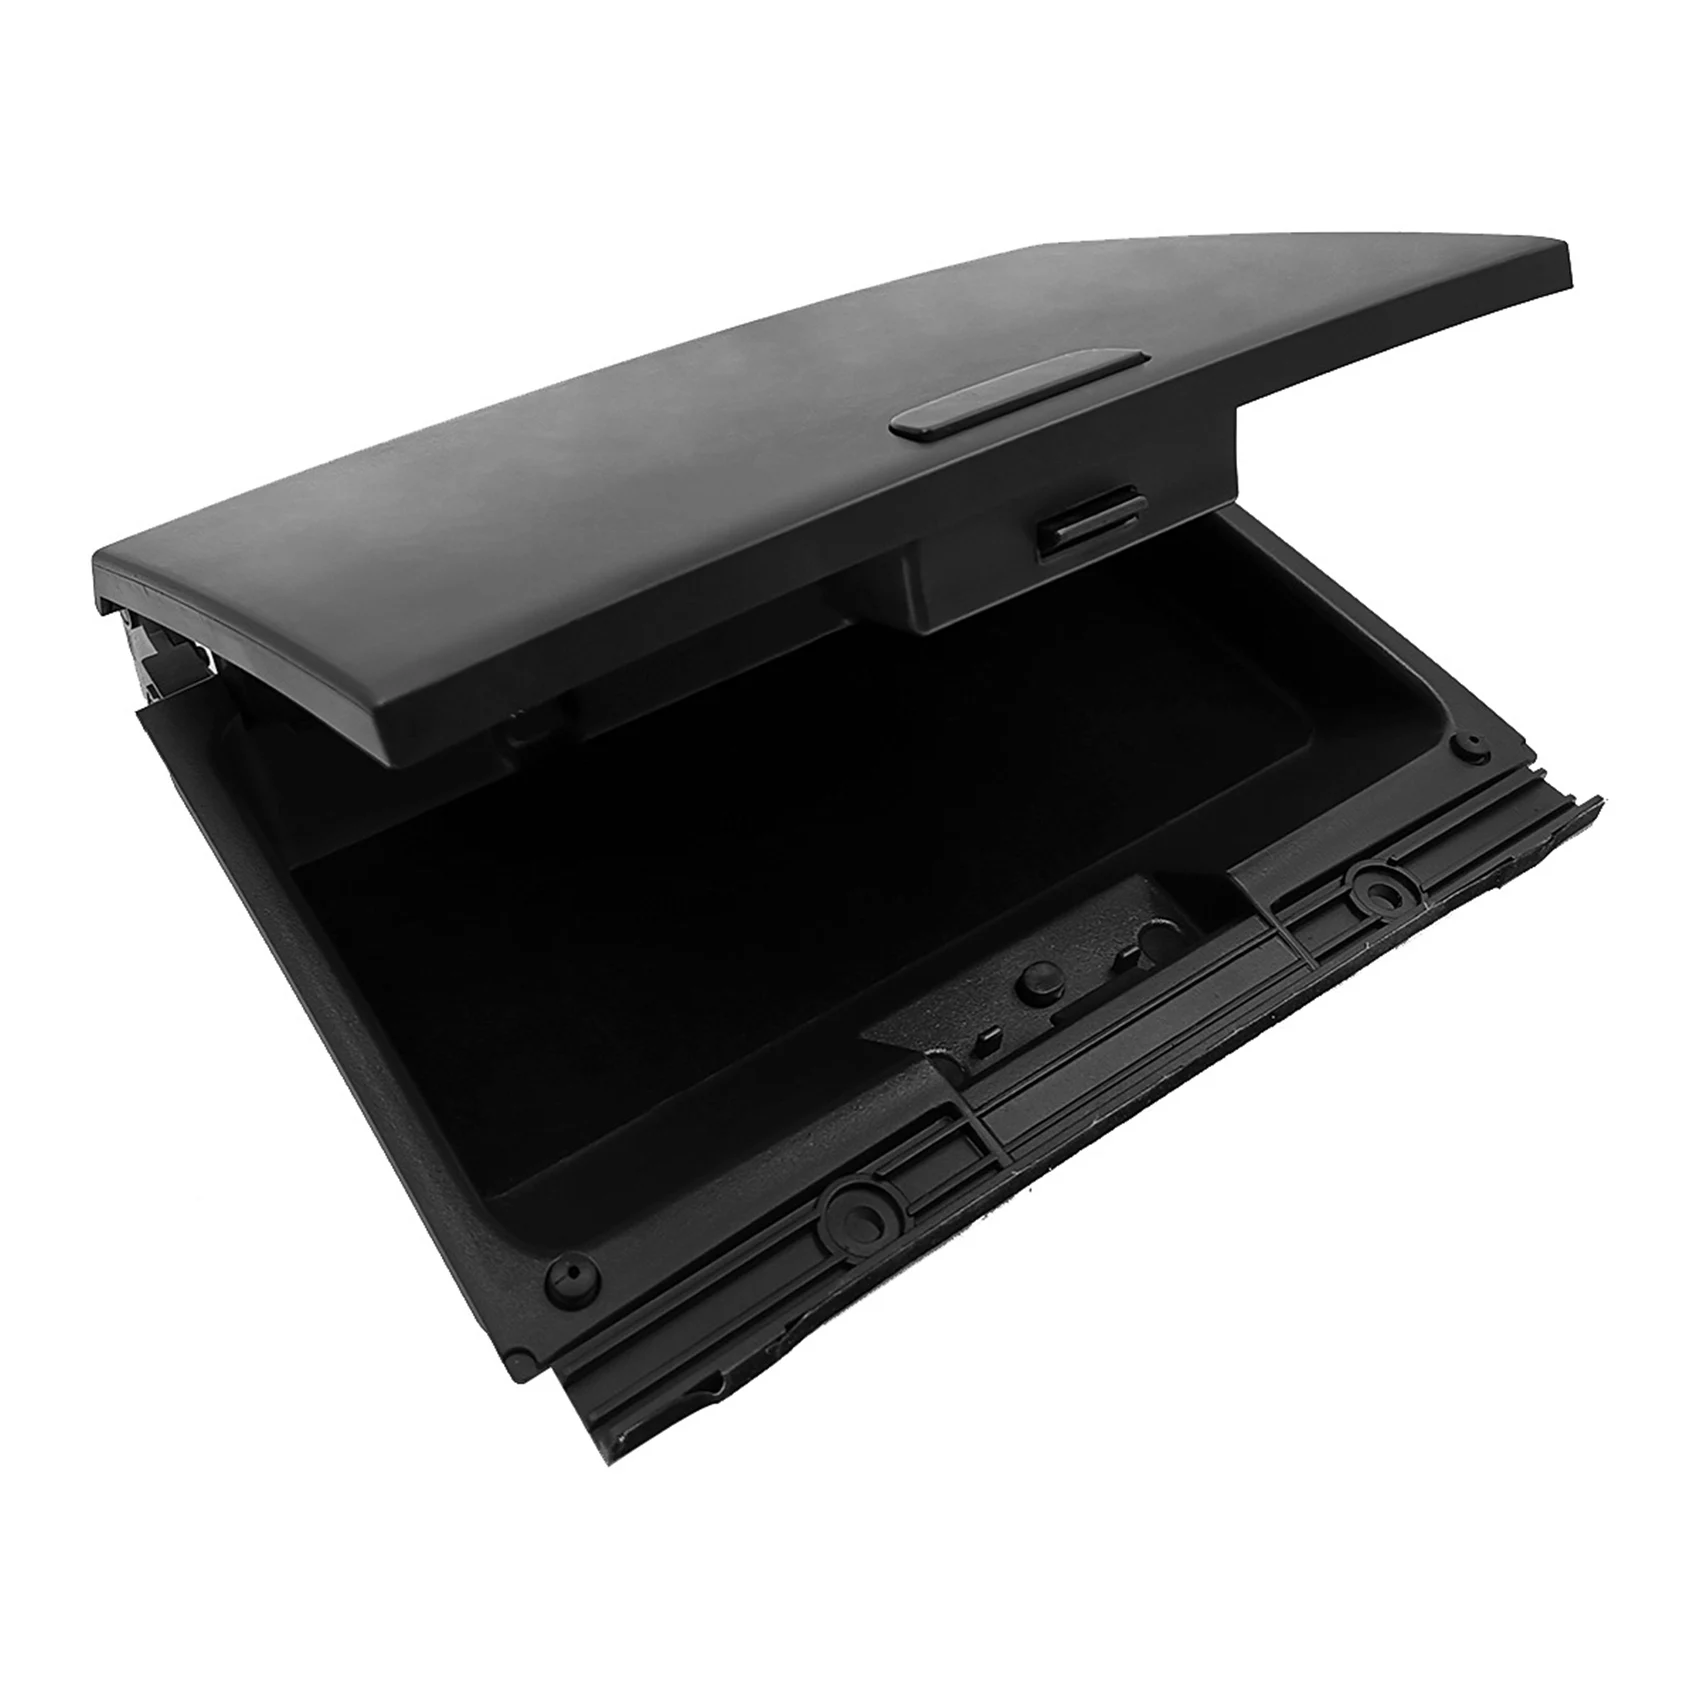 

Car Styling Front Centre Storage Box Dashboard for Chevrolet Sail for Chevrolet Aveo 2006-2012